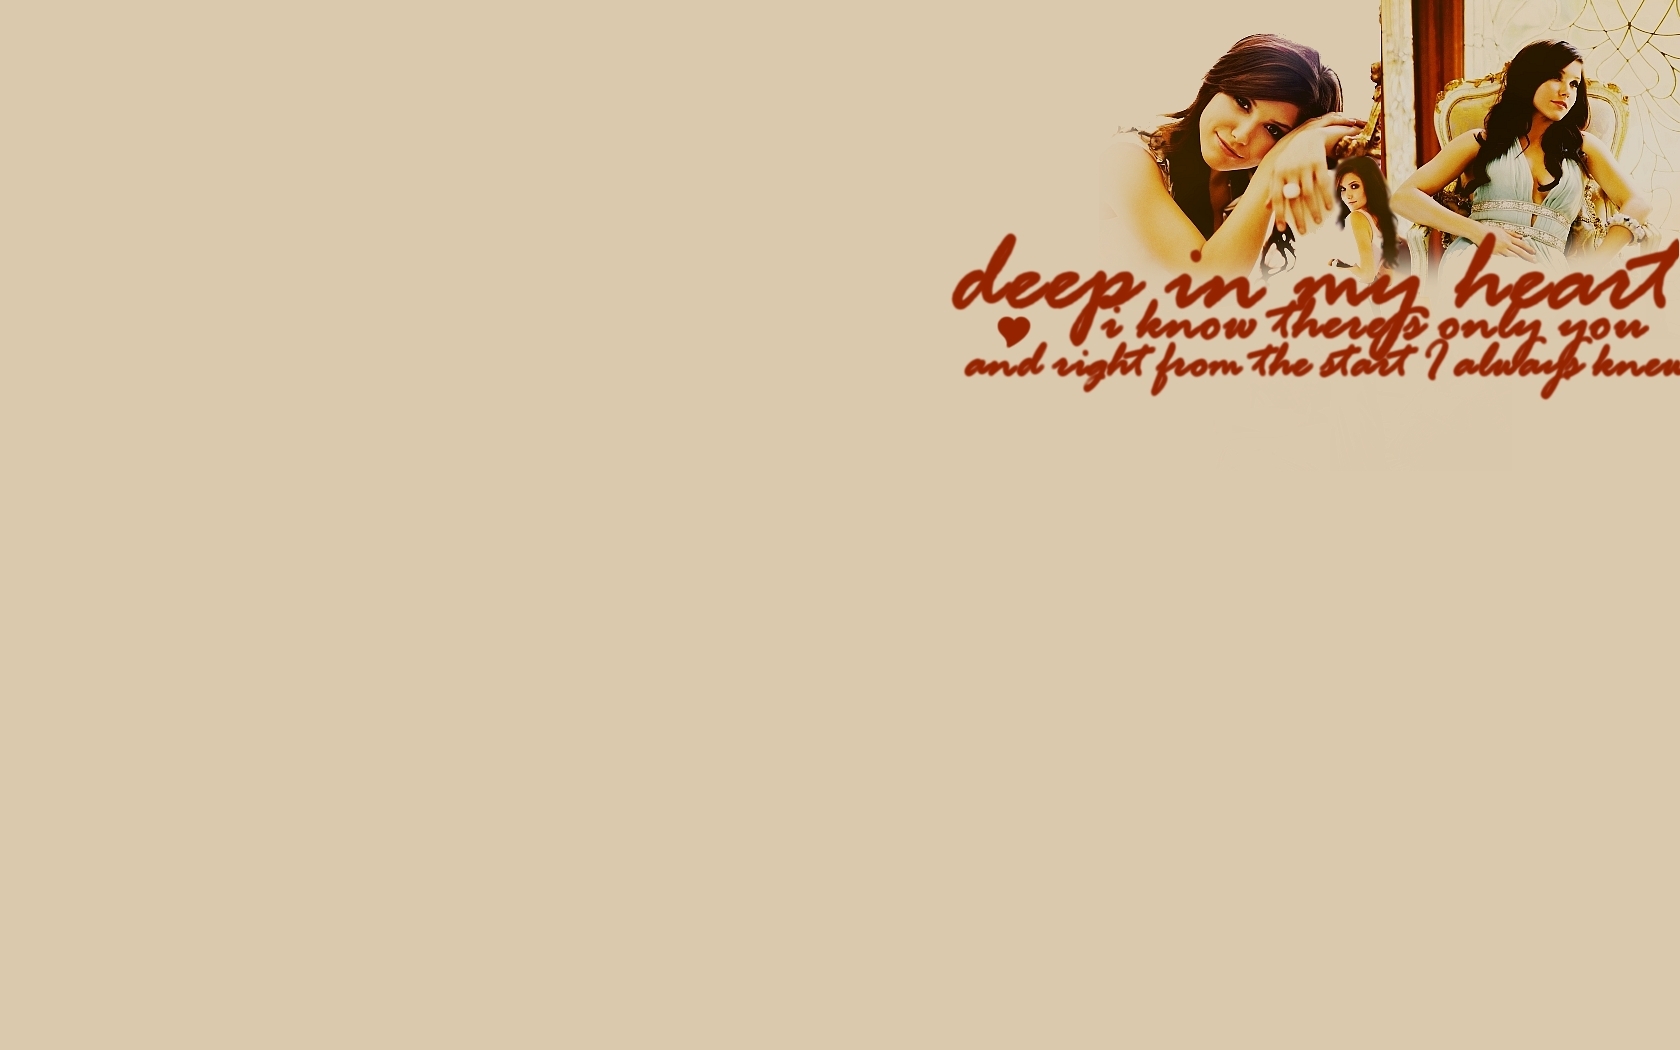 One Tree Hill Image Sophia HD Wallpaper And Background